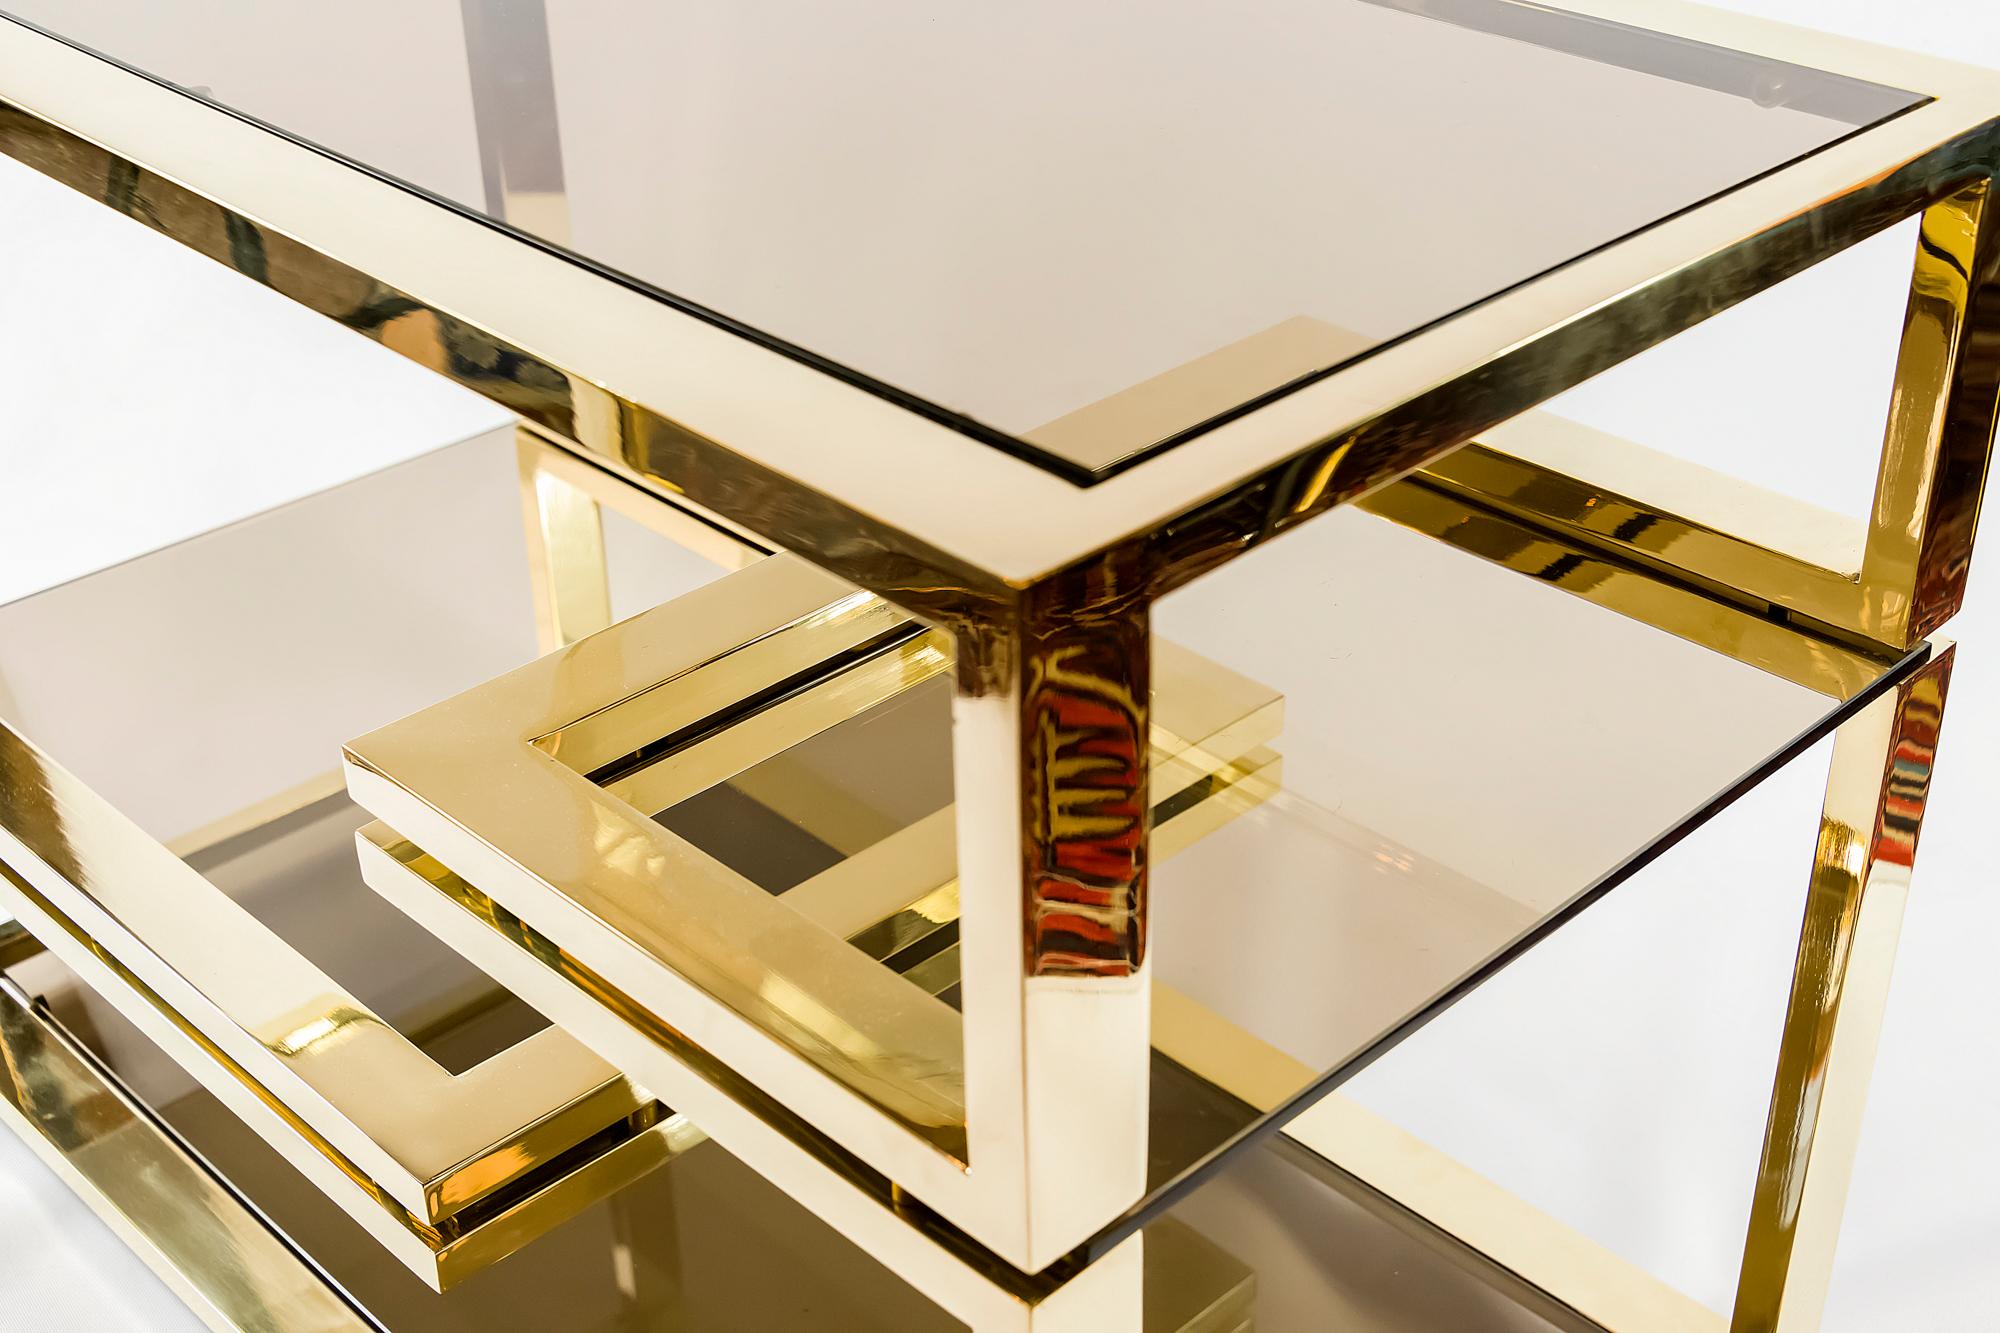 Polished Midcentury Italian Brass and Glass Serving Table, circa 1960